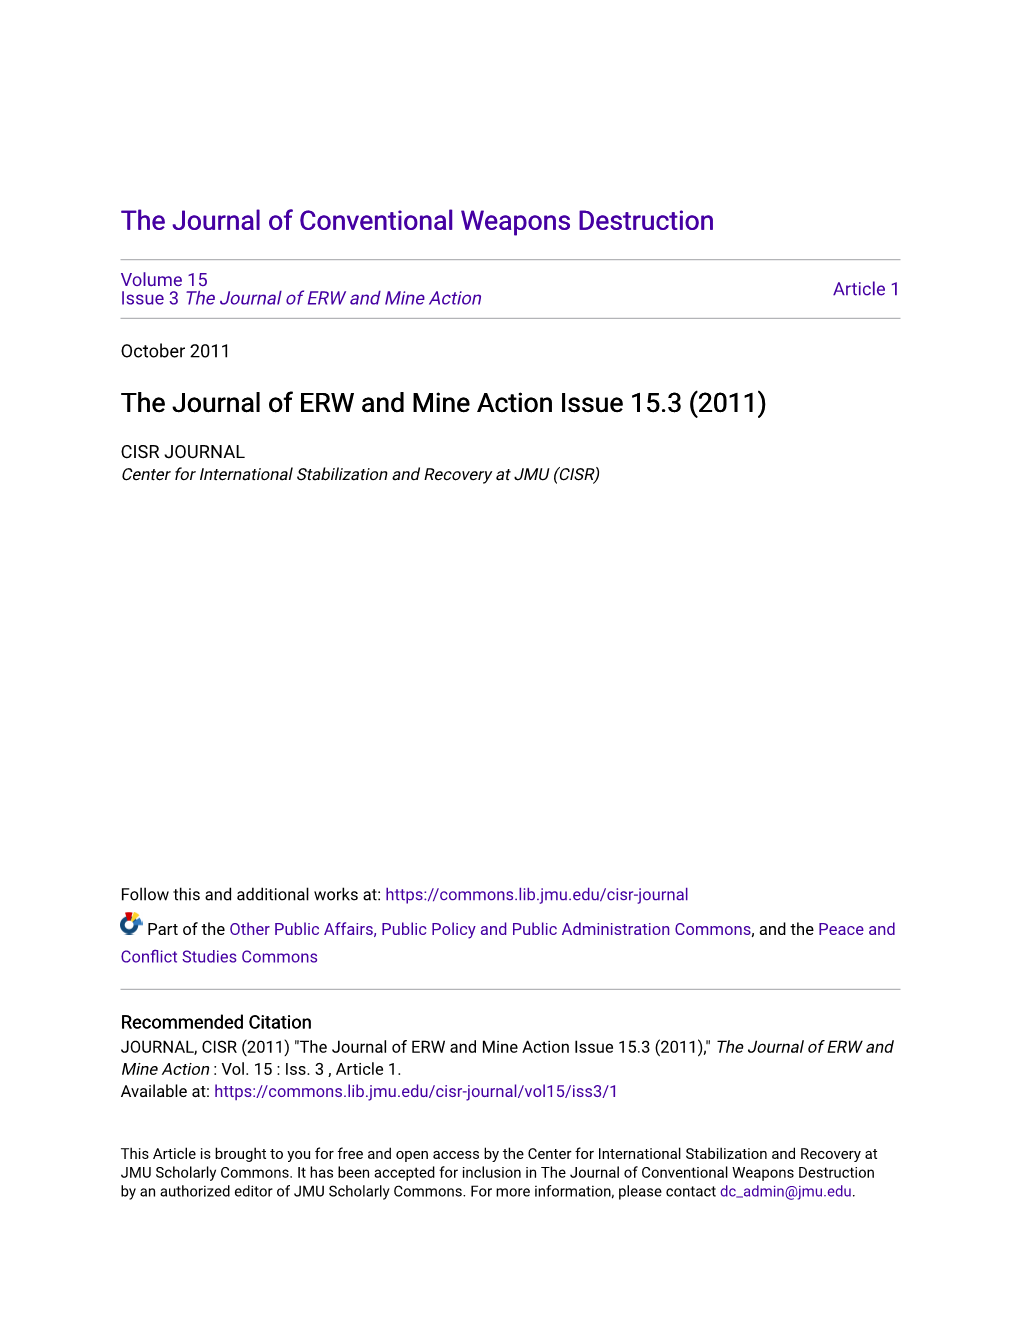 The Journal of ERW and Mine Action Issue 15.3 (2011)